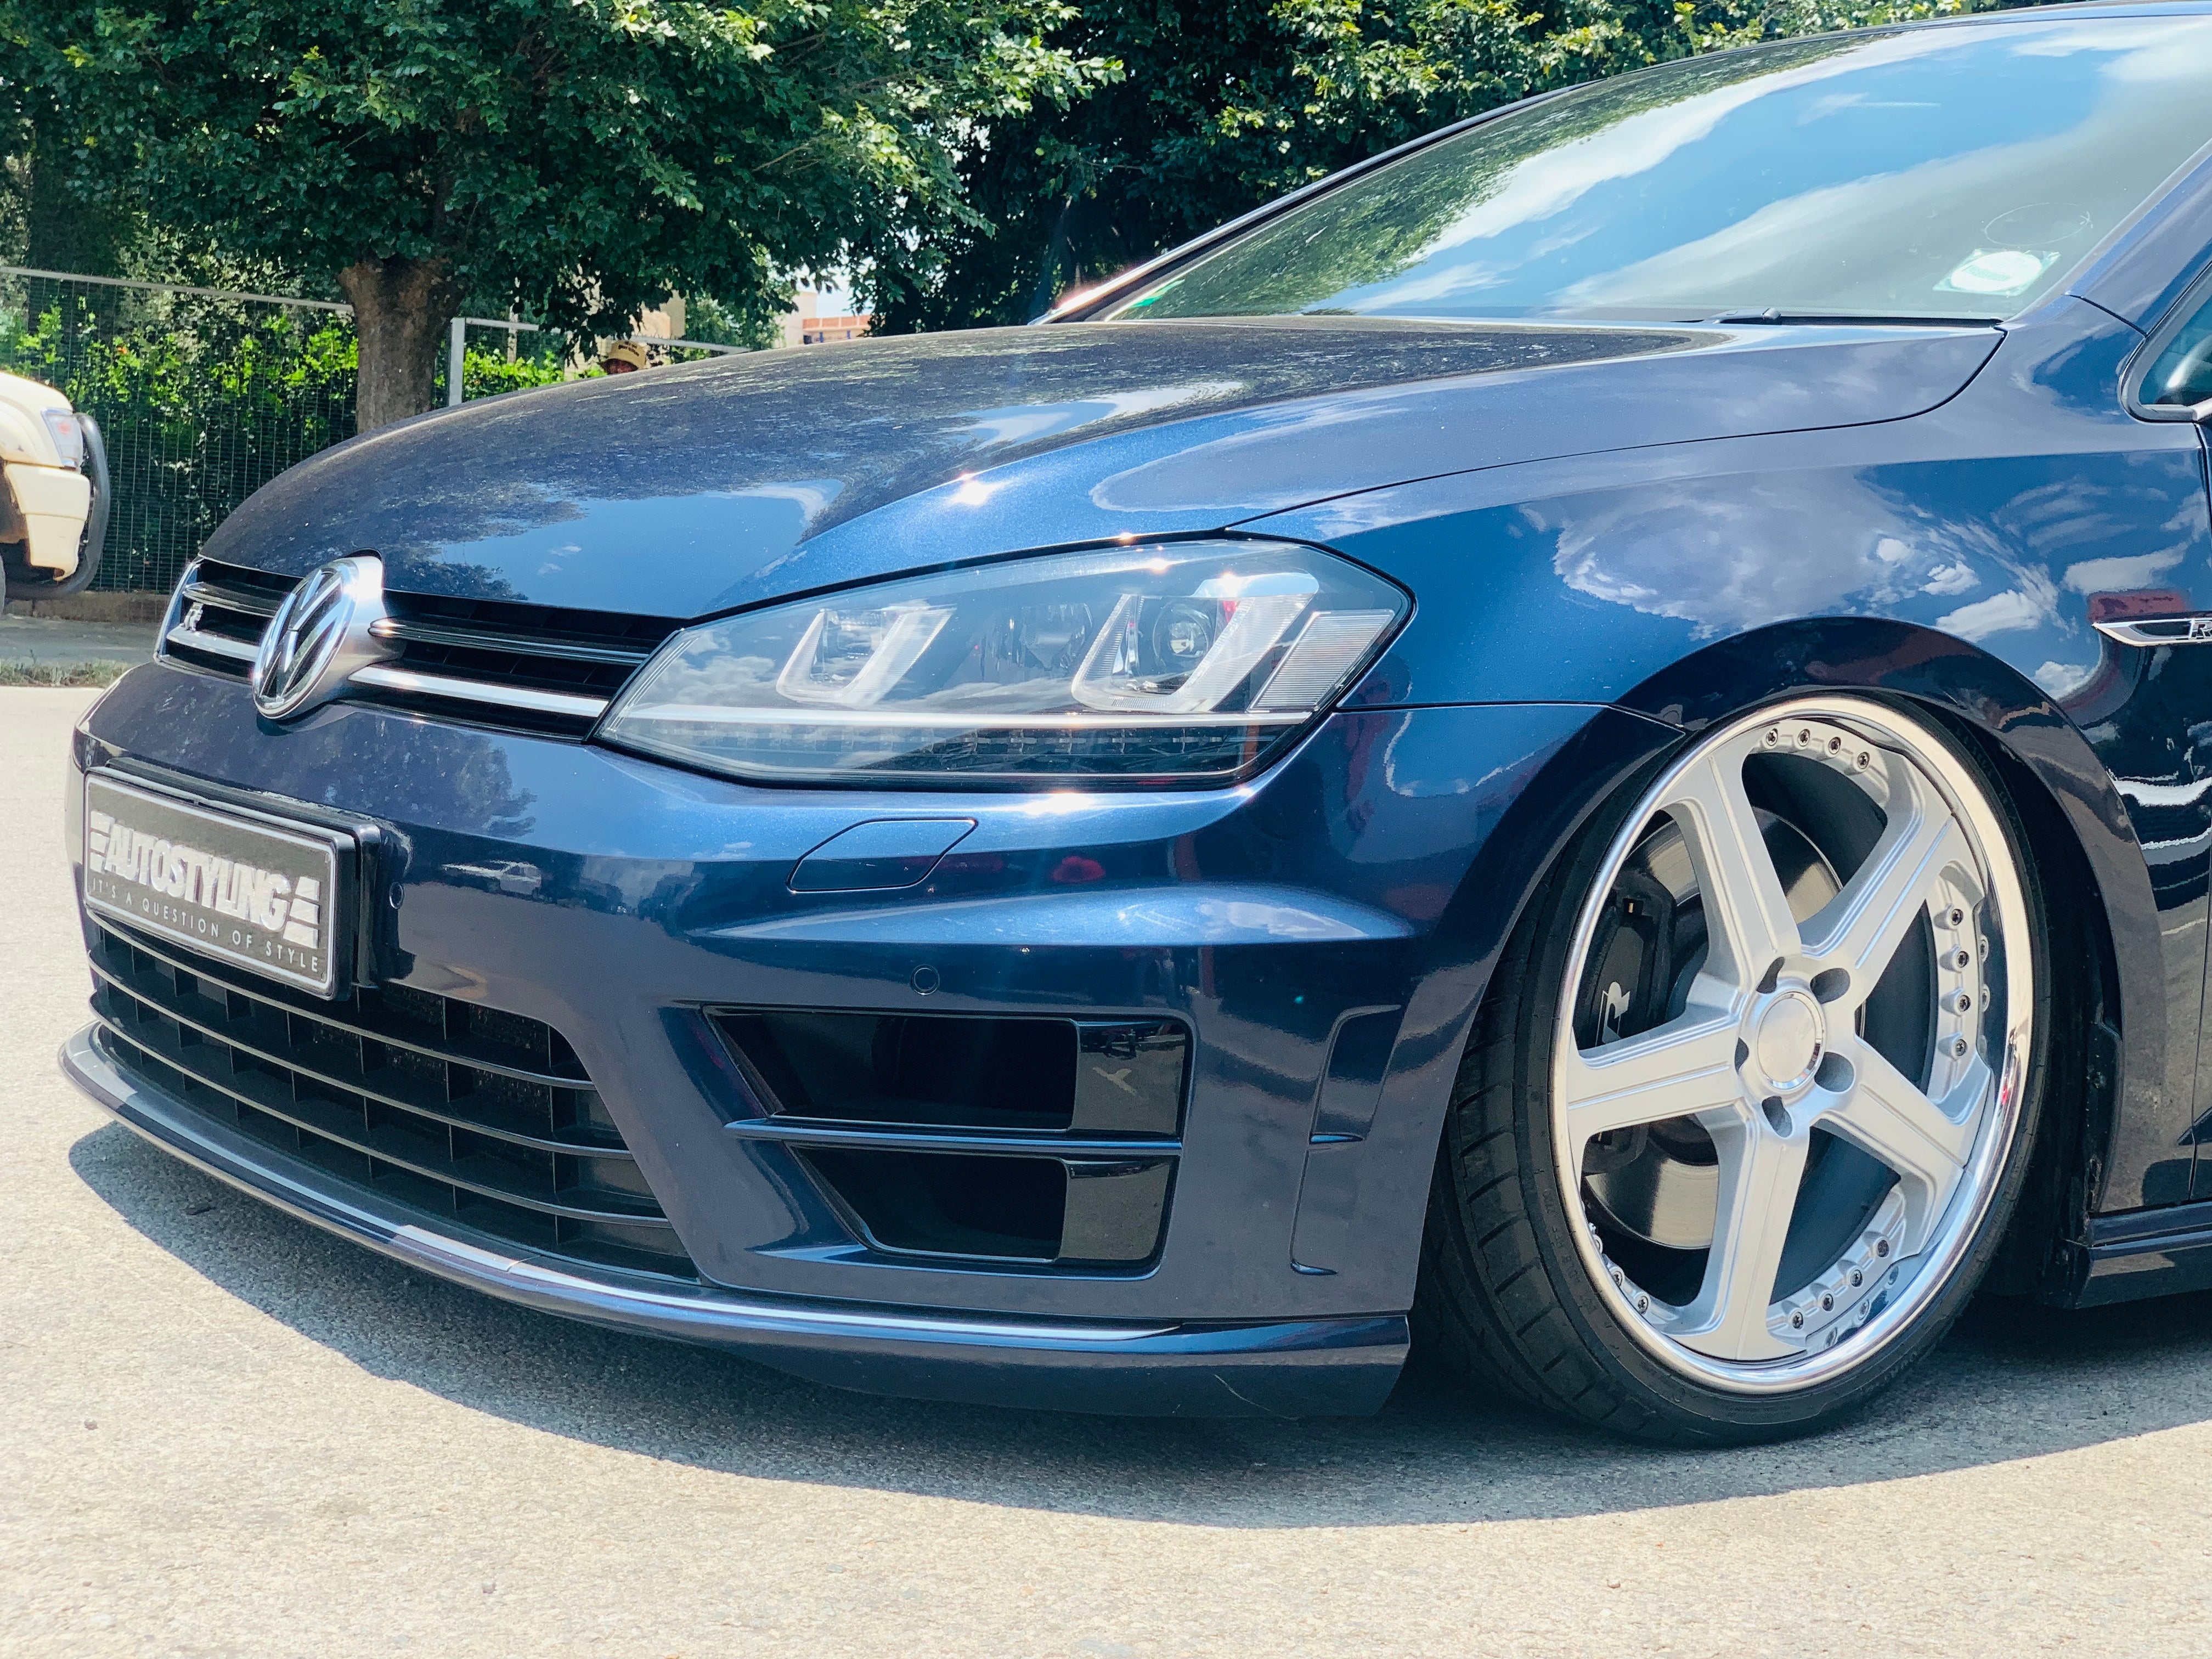 2016 GOLF 7R BAGGED ONLY 86000km